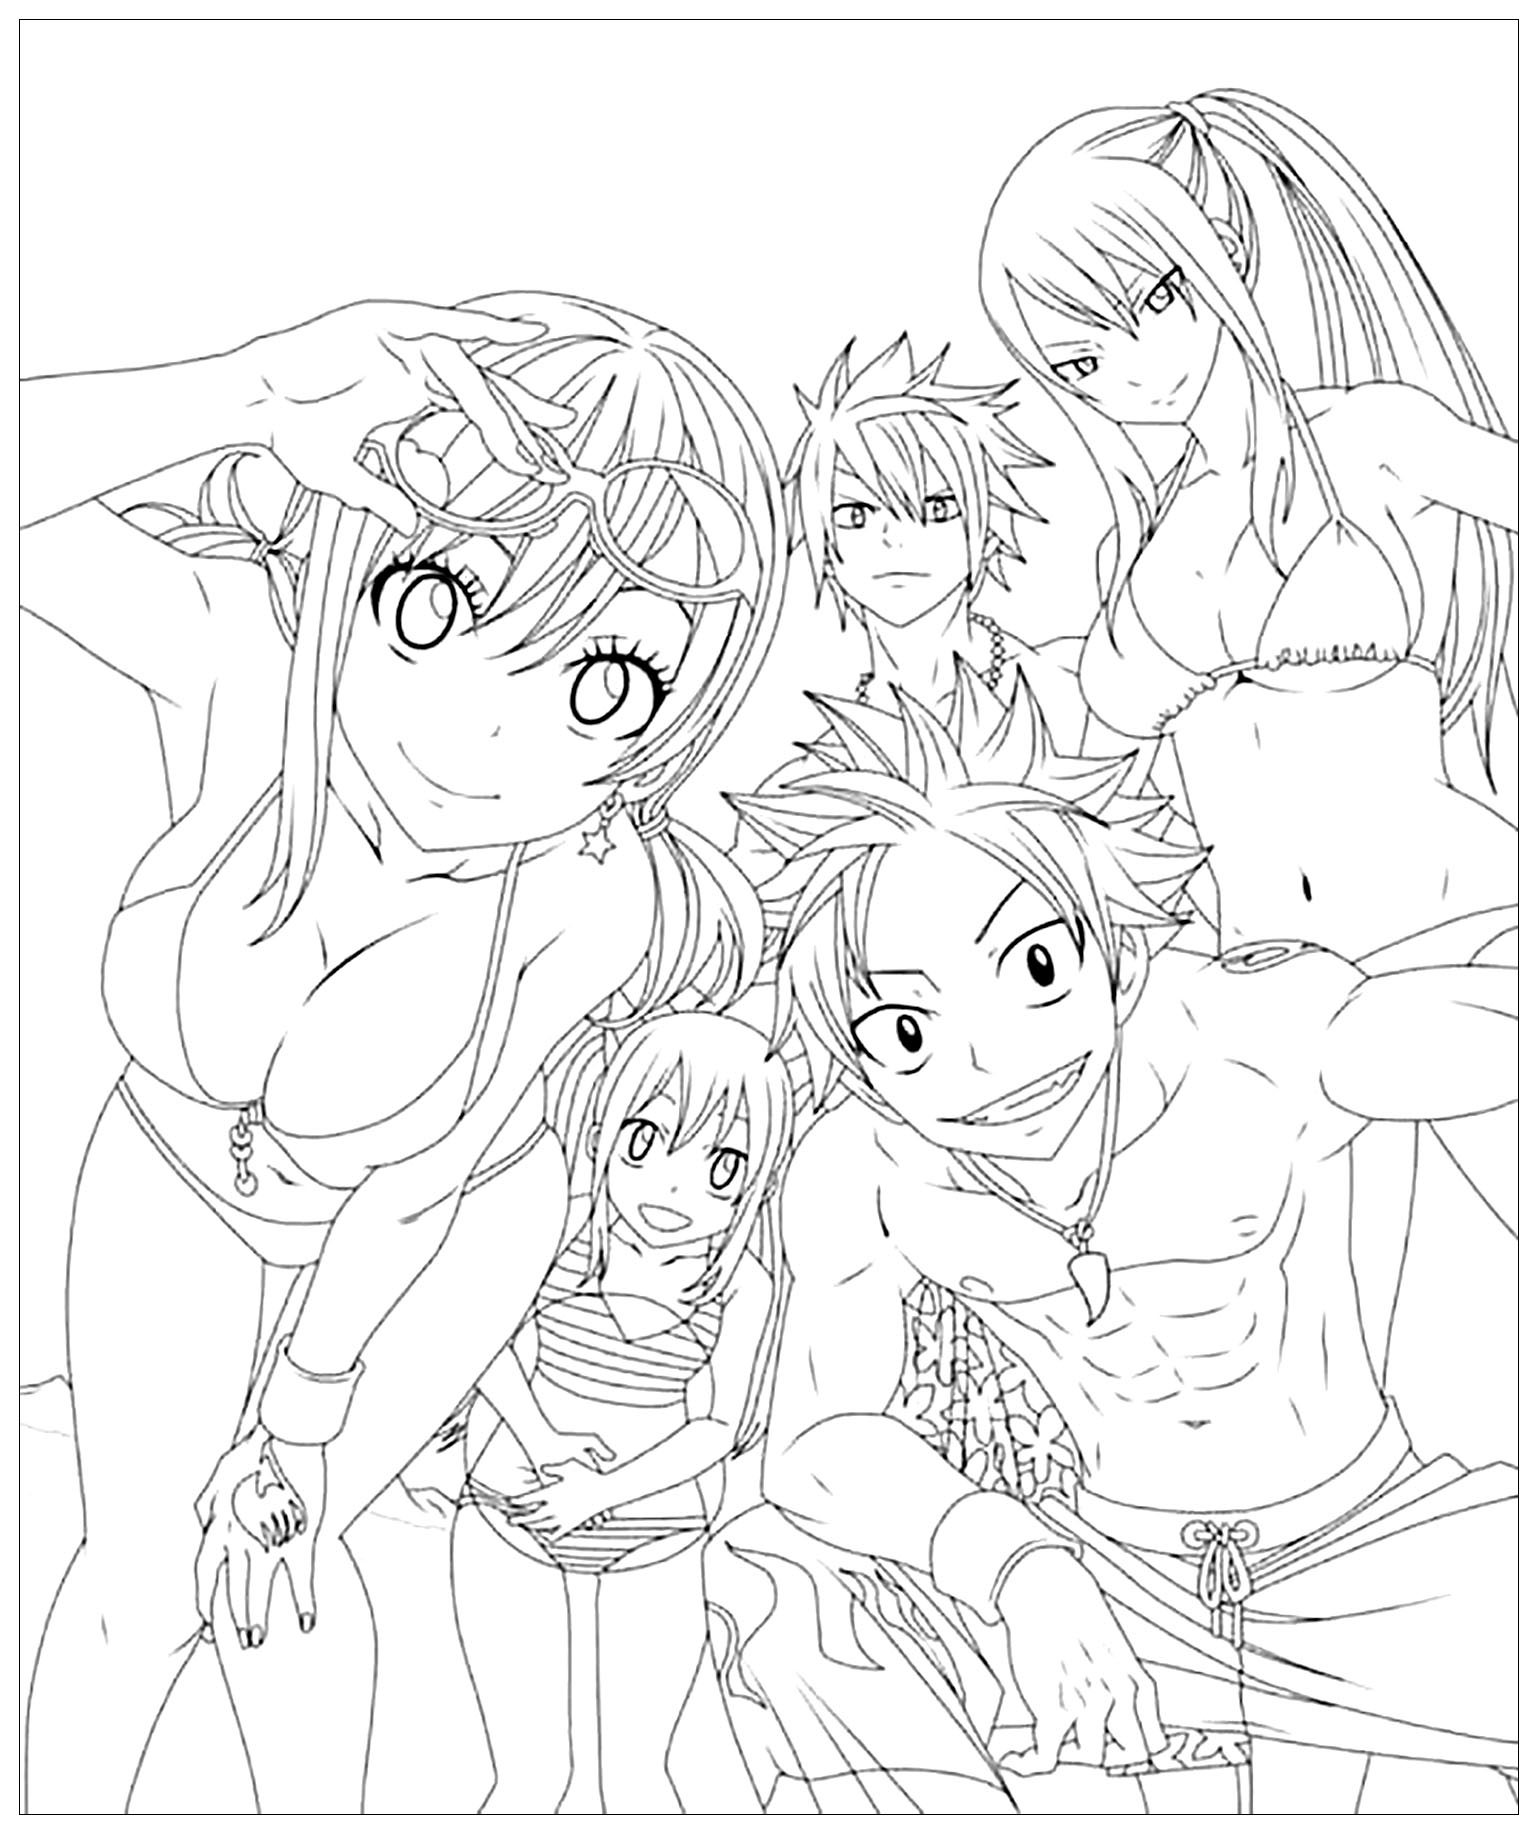 Fairy tail drawing to color, easy for kids